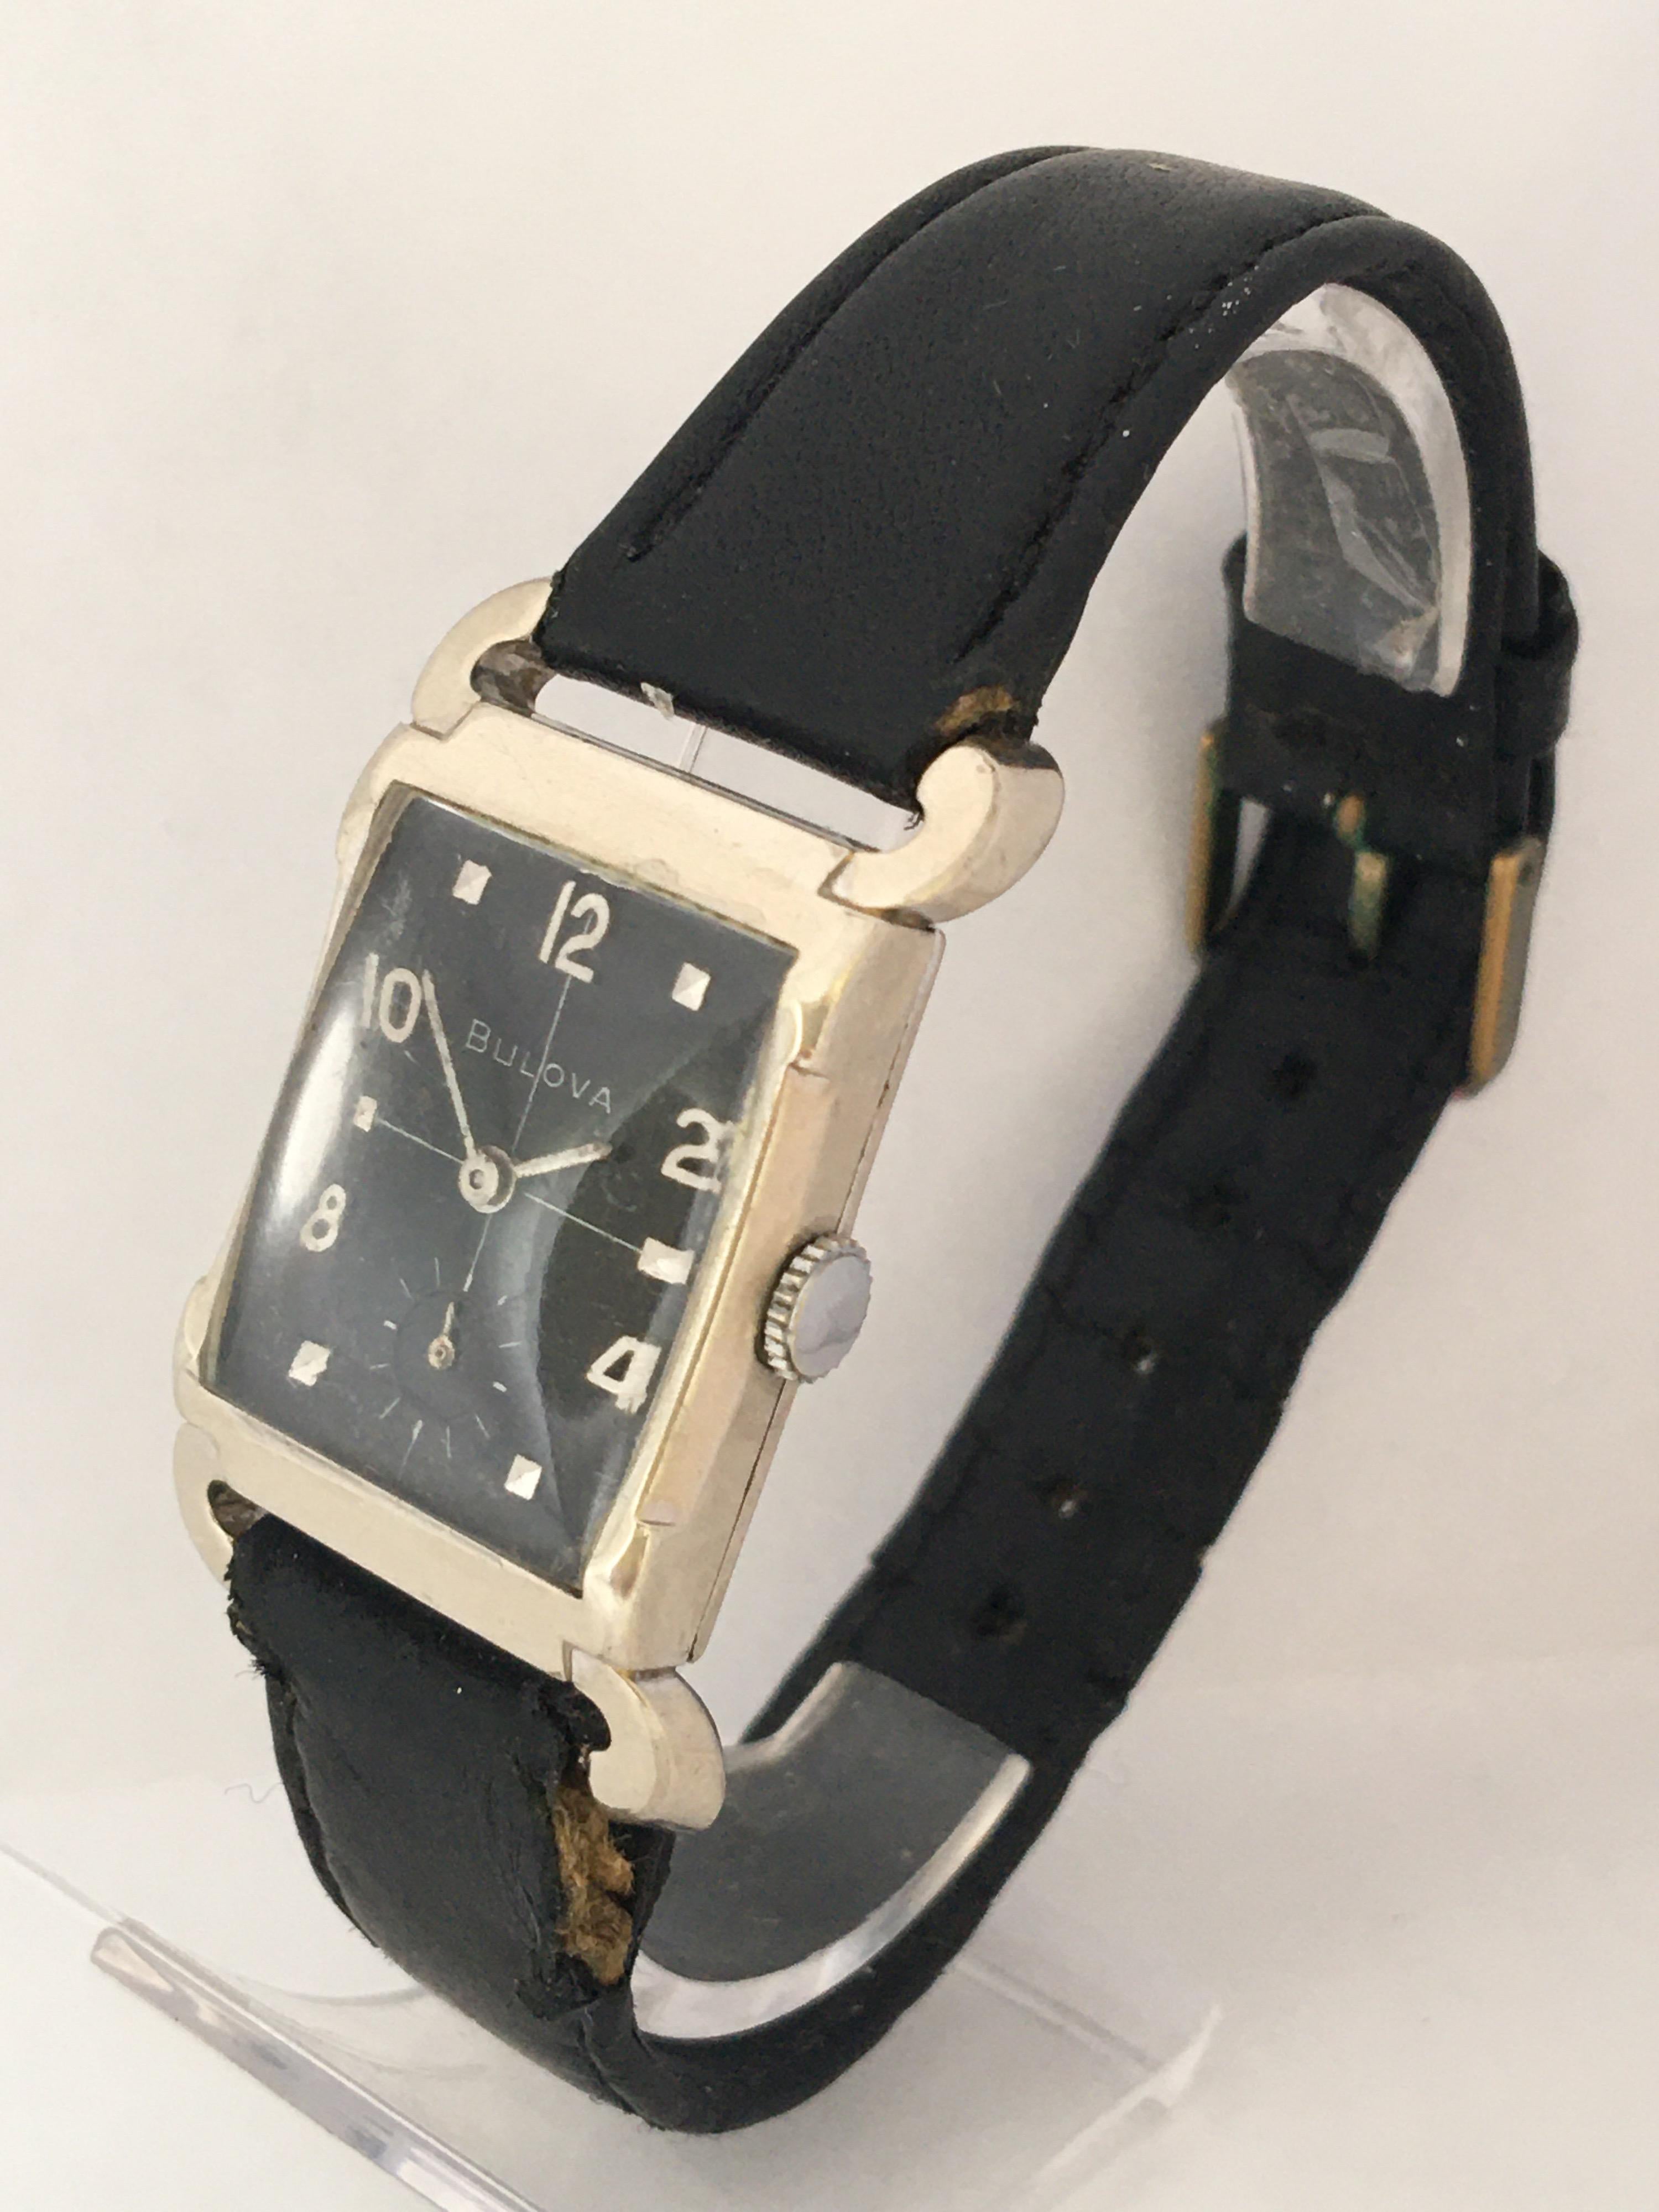 This beautiful vintage hand winding watch is working and ticking well however due to its age I cannot guarantee its time accuracy. Visible signs of ageing and wear with light scratches on the glass and on the watch case as shown. The old black